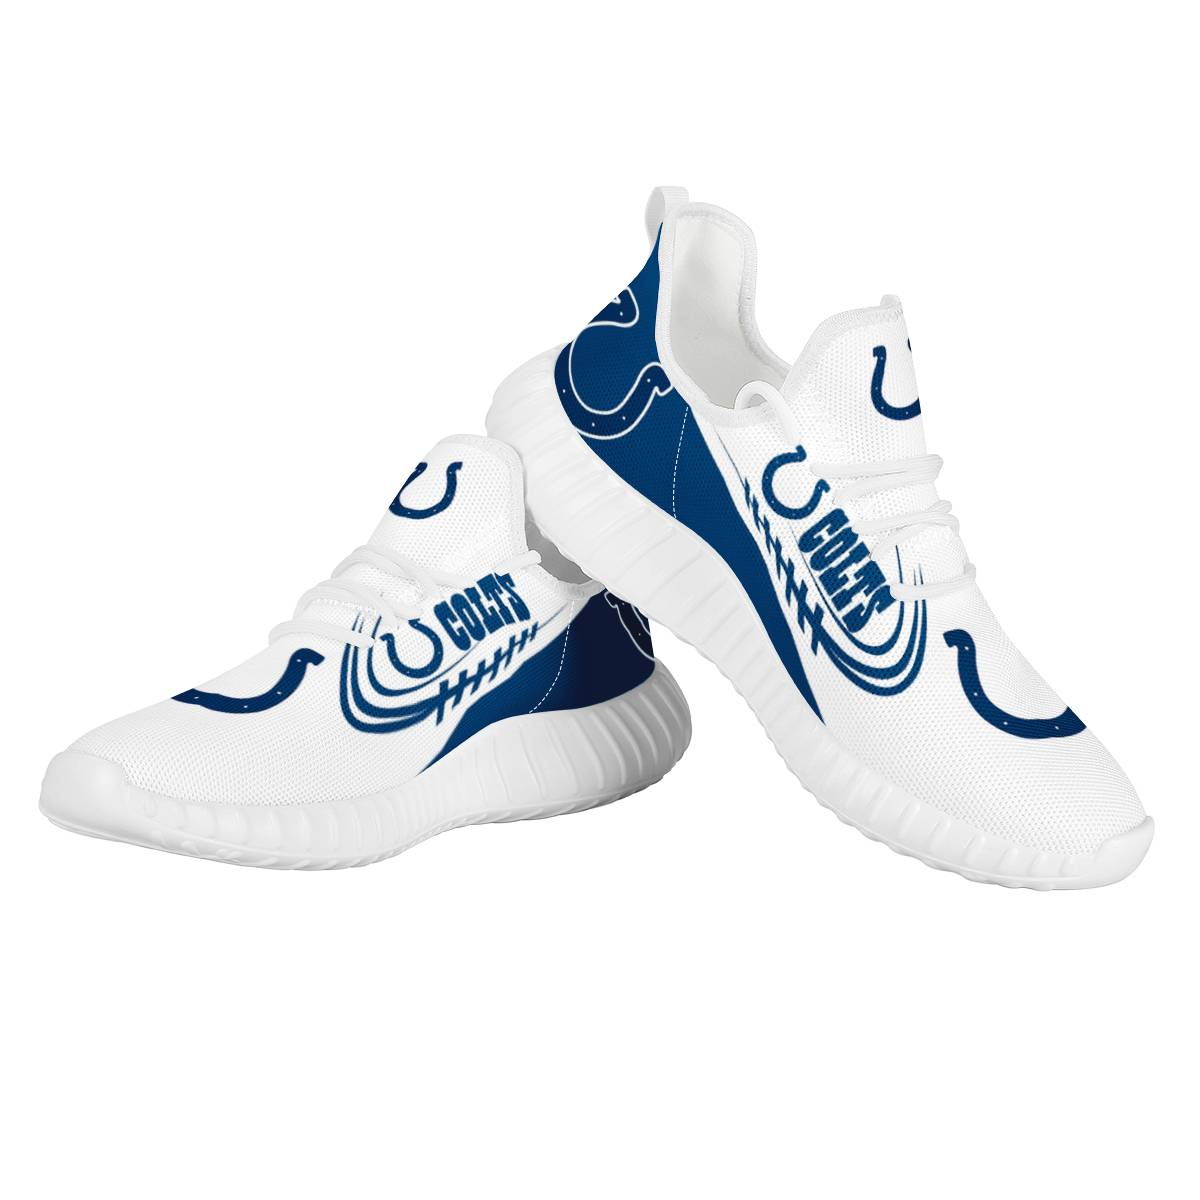 Women's Indianapolis Colts Mesh Knit Sneakers/Shoes 004